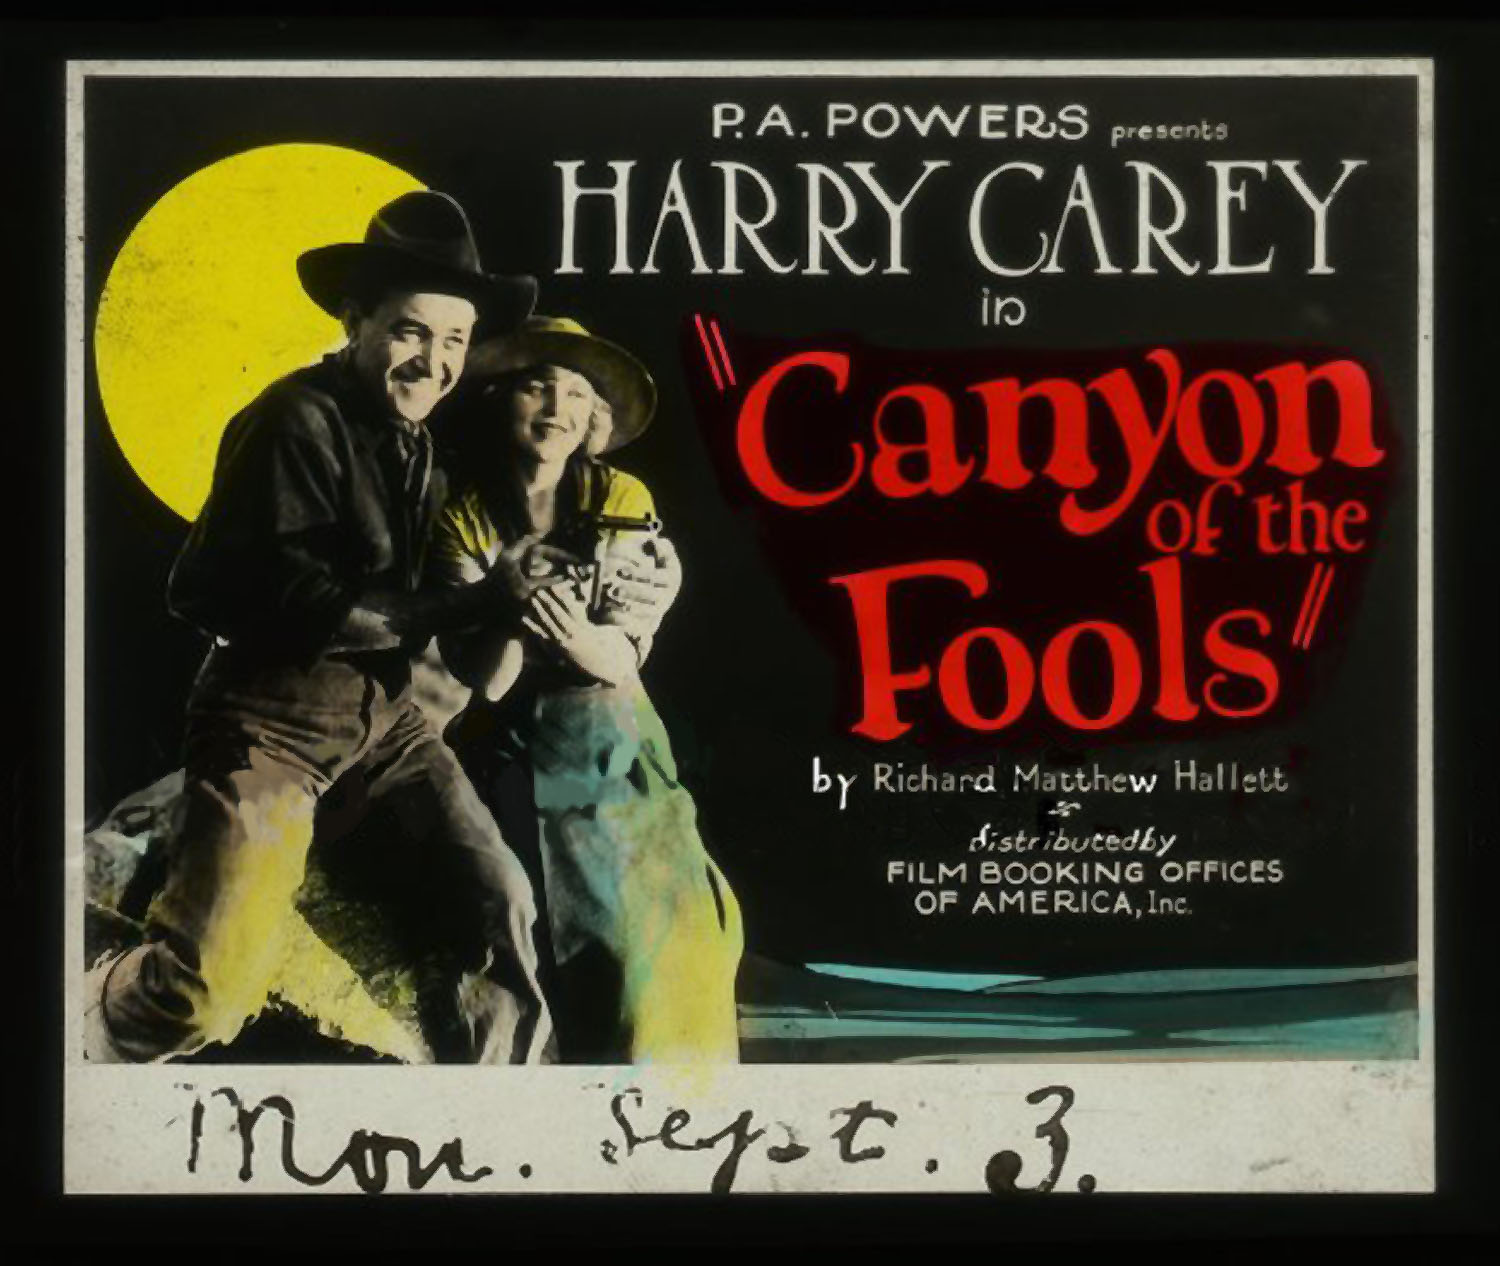 CANYON OF THE FOOLS